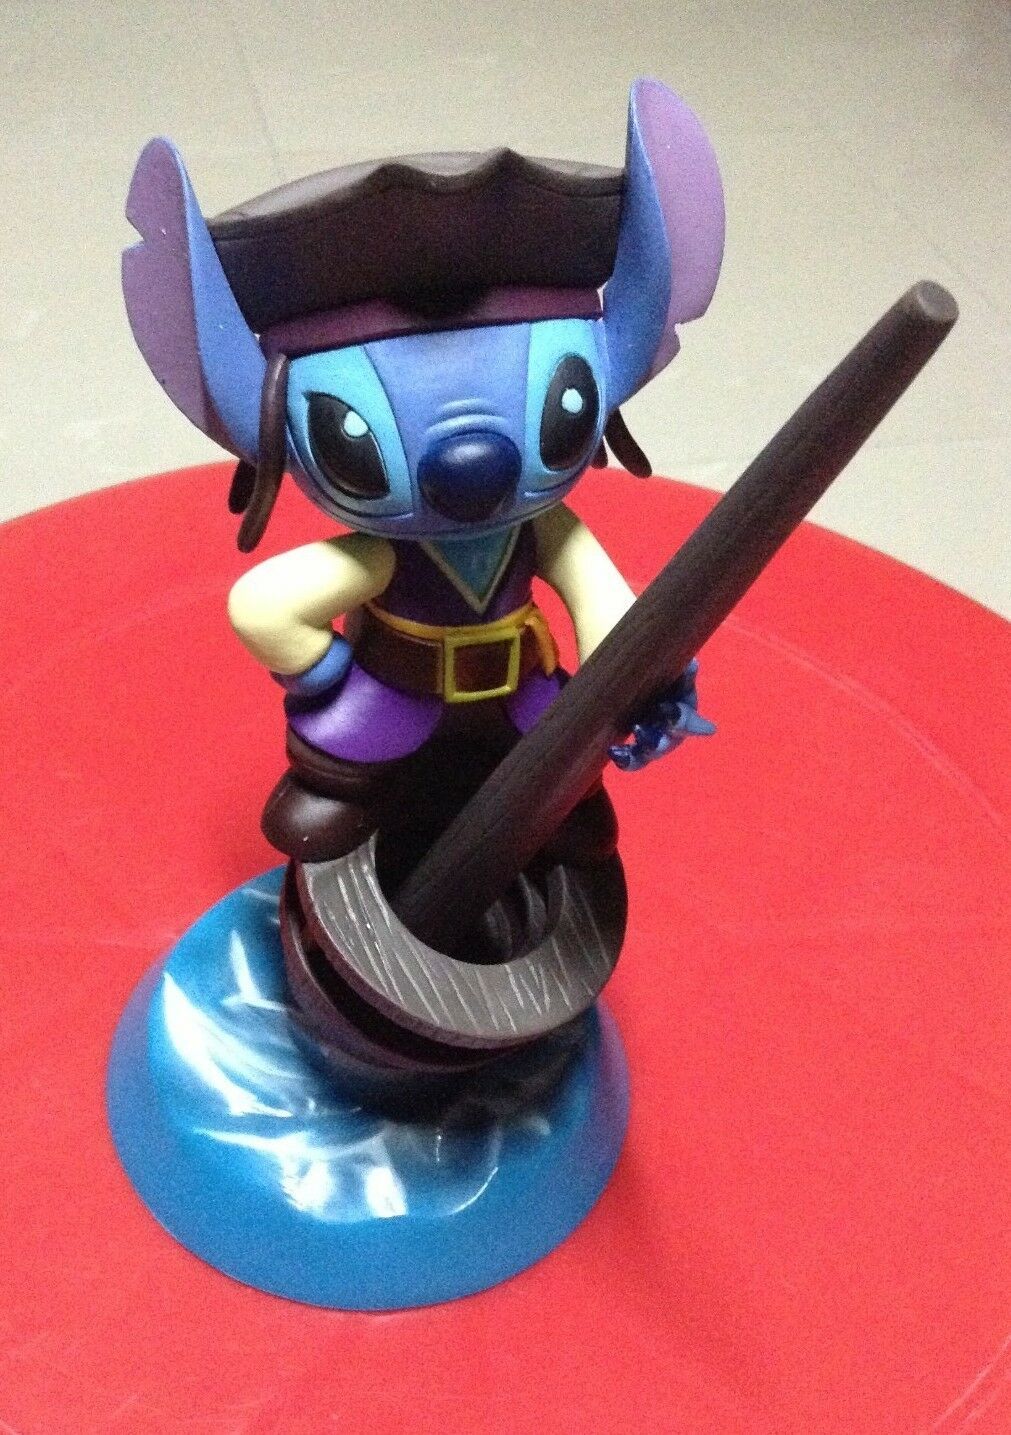 Primary image for Disney toy model from lilo stitch Pirates of the Caribbean very pretty and rare